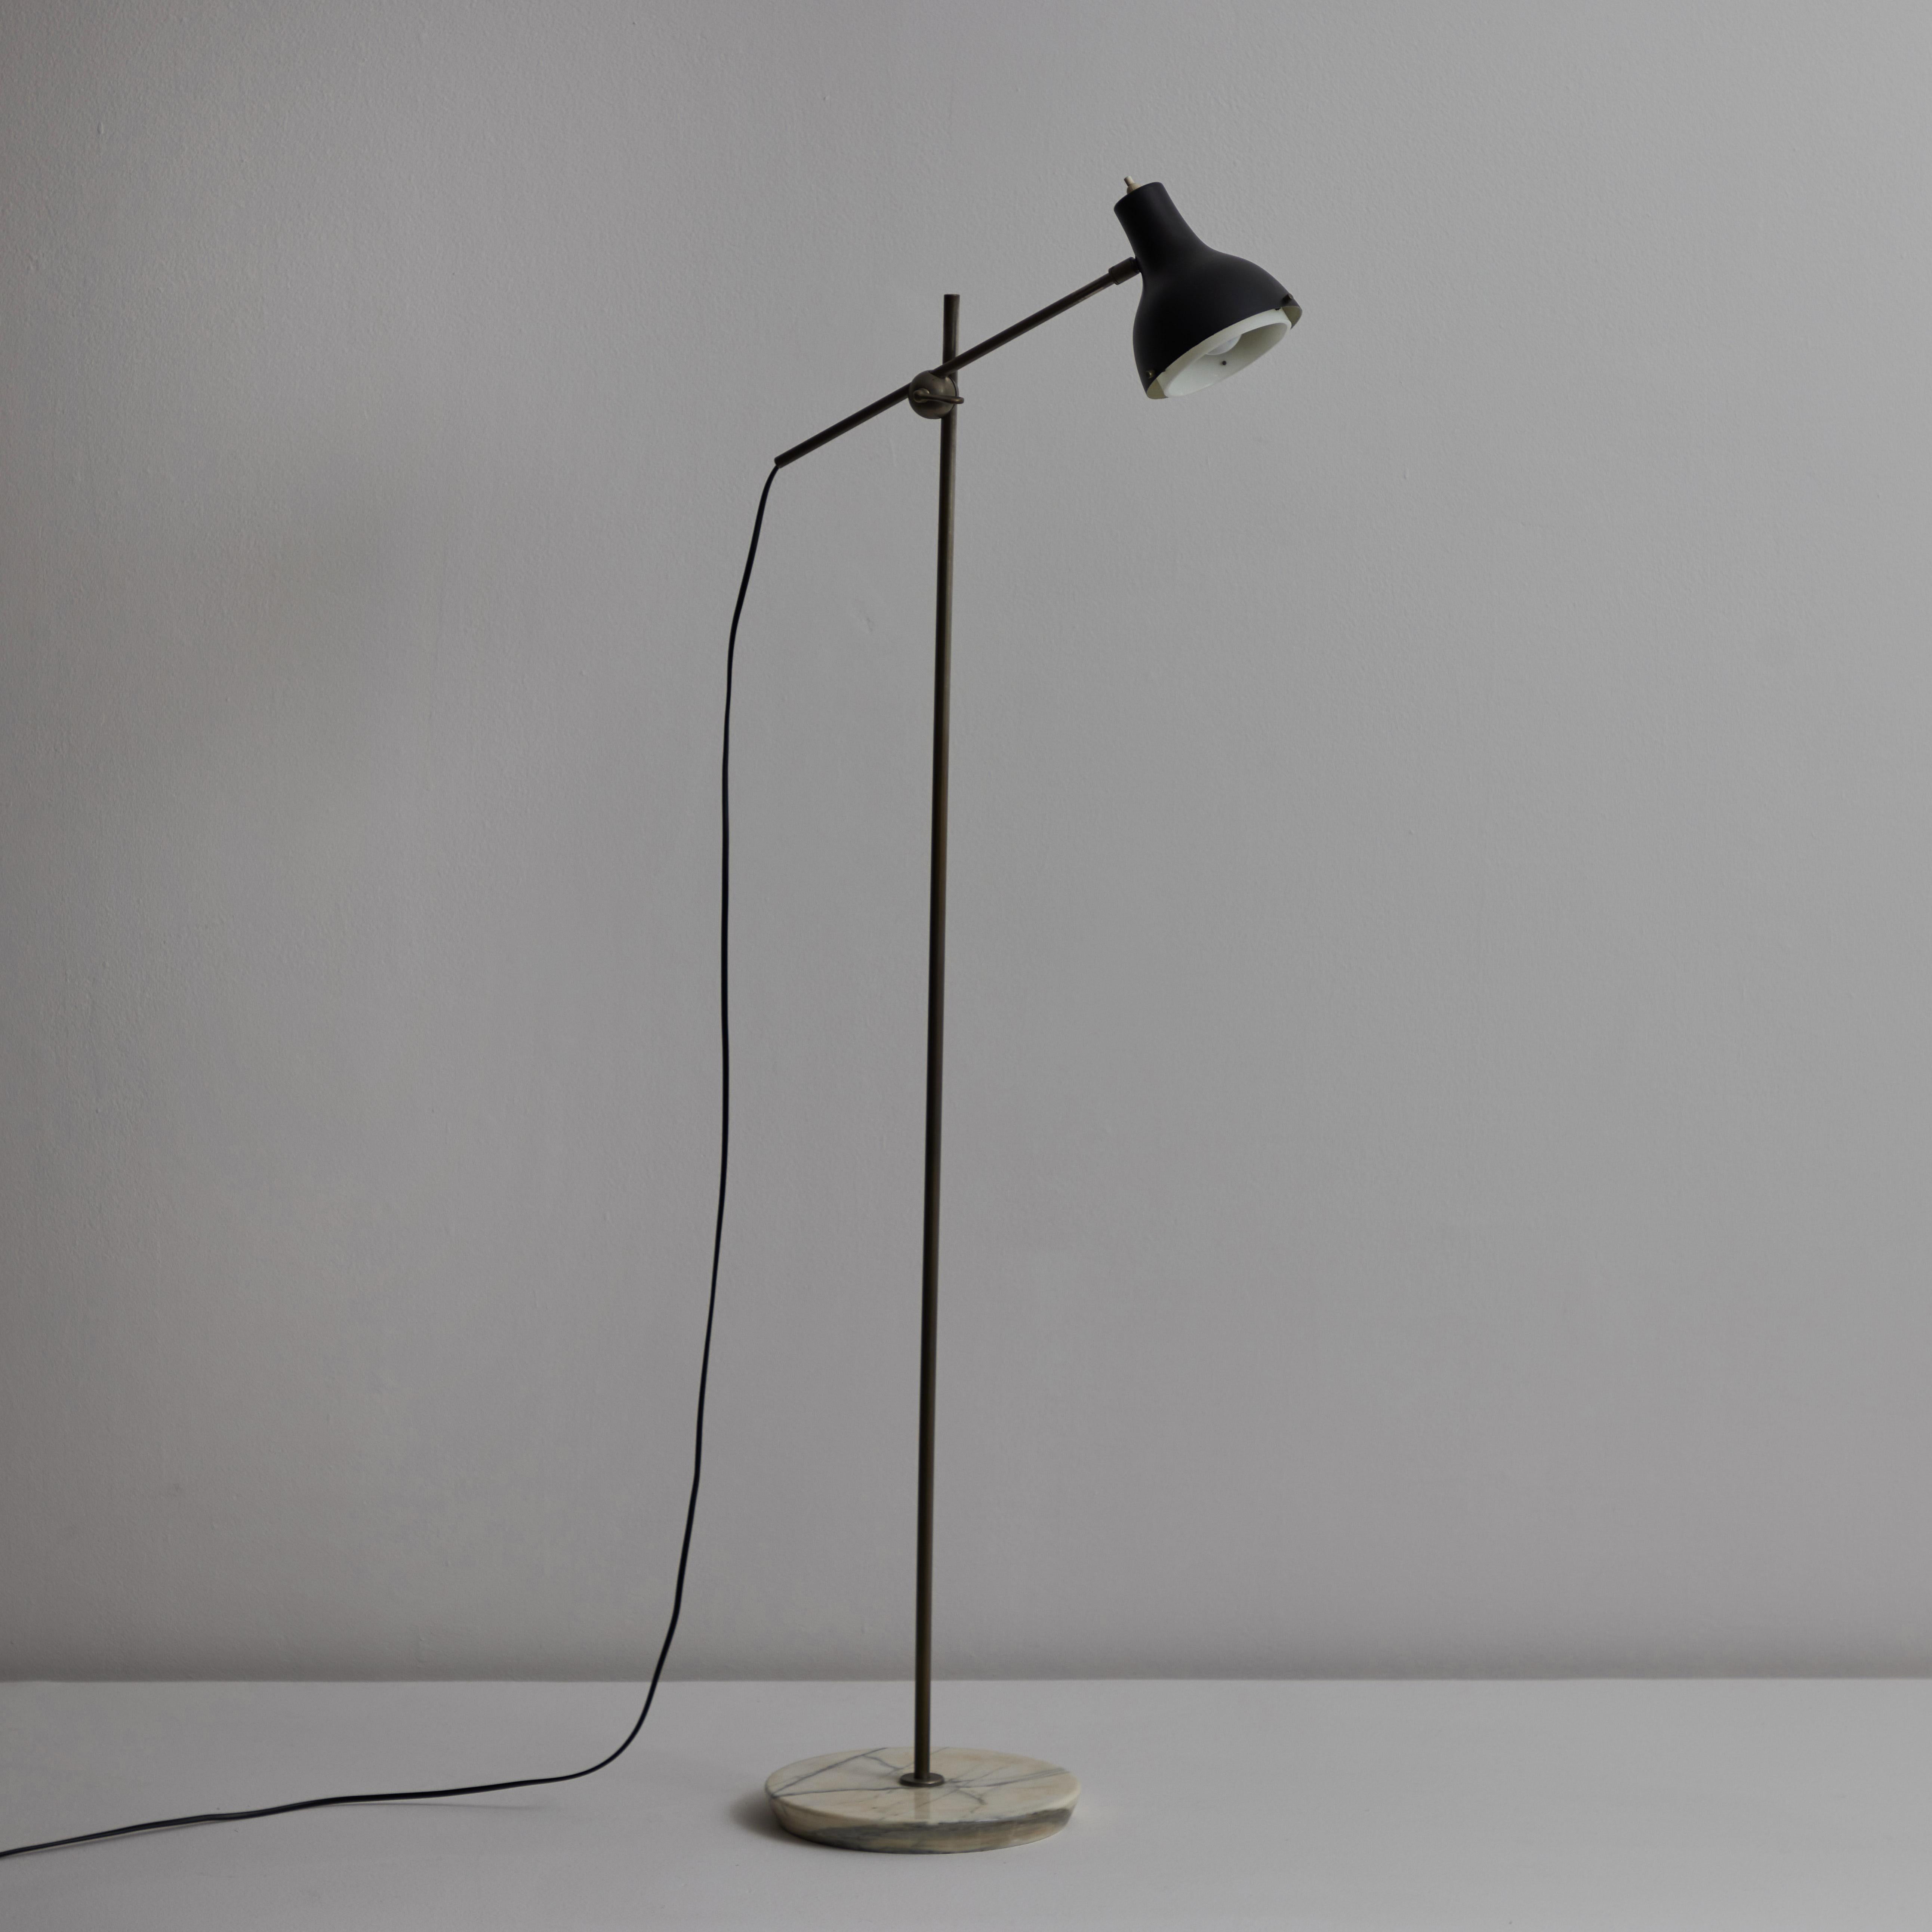 Adjustable Floor Lamp by Stilux. Designed and manufactured by Stilux in Italy, circa 1950's. Carrara marble base holds a steel stem and adjustable boom arm allows shade to pivot vertically. Shade interior houses a secondary acrylic diffuser.